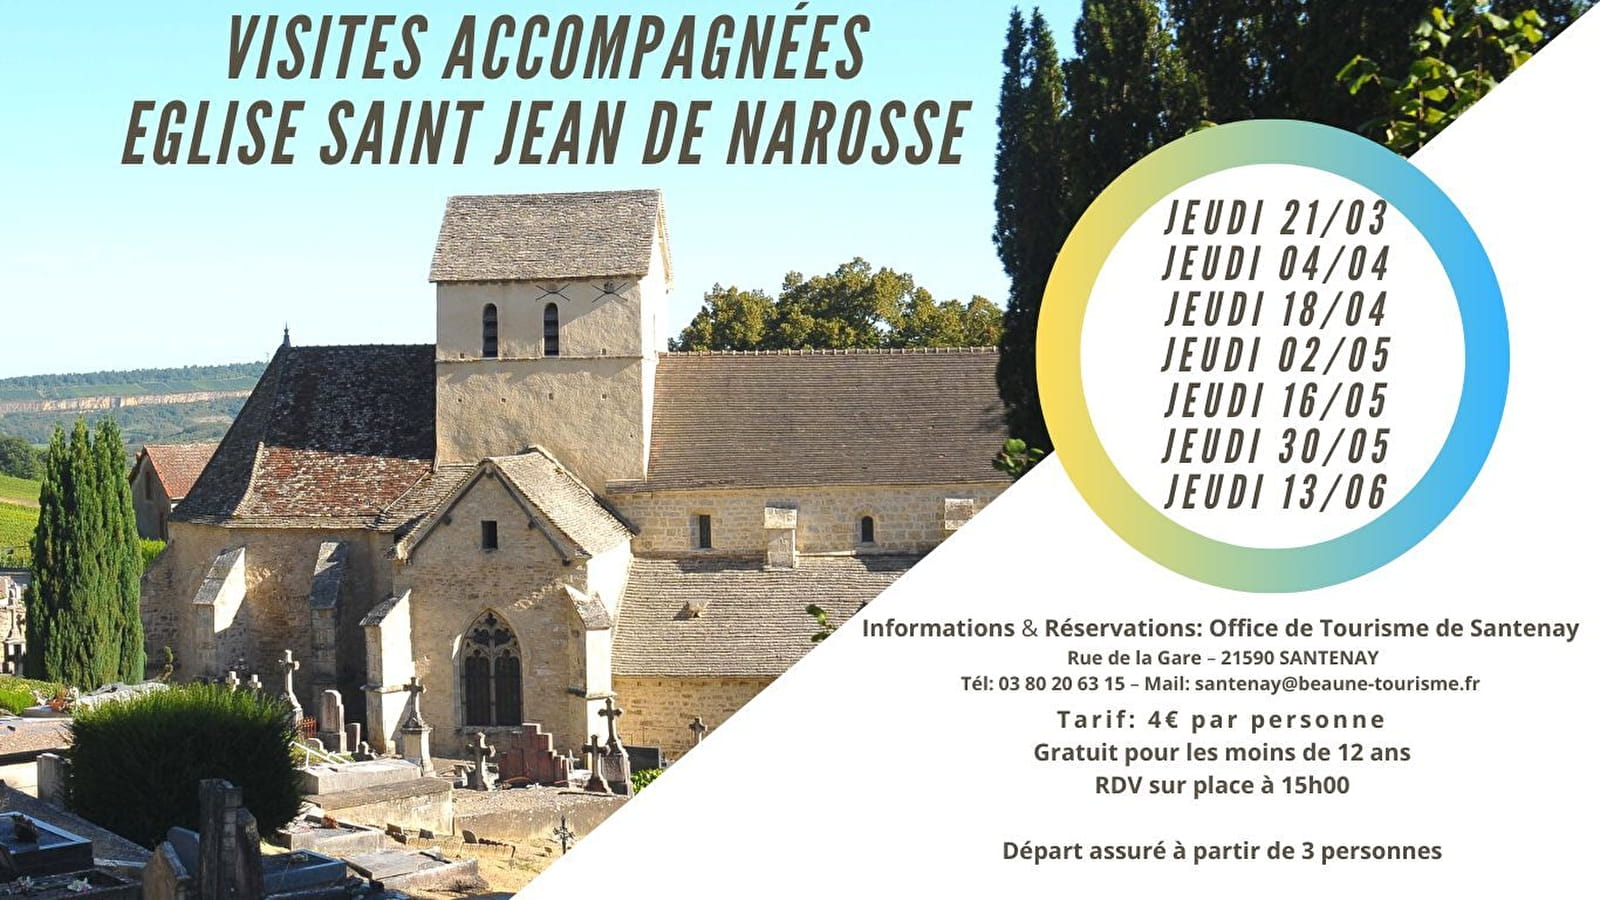 Guided tours of the Church of Saint Jean de Narosse